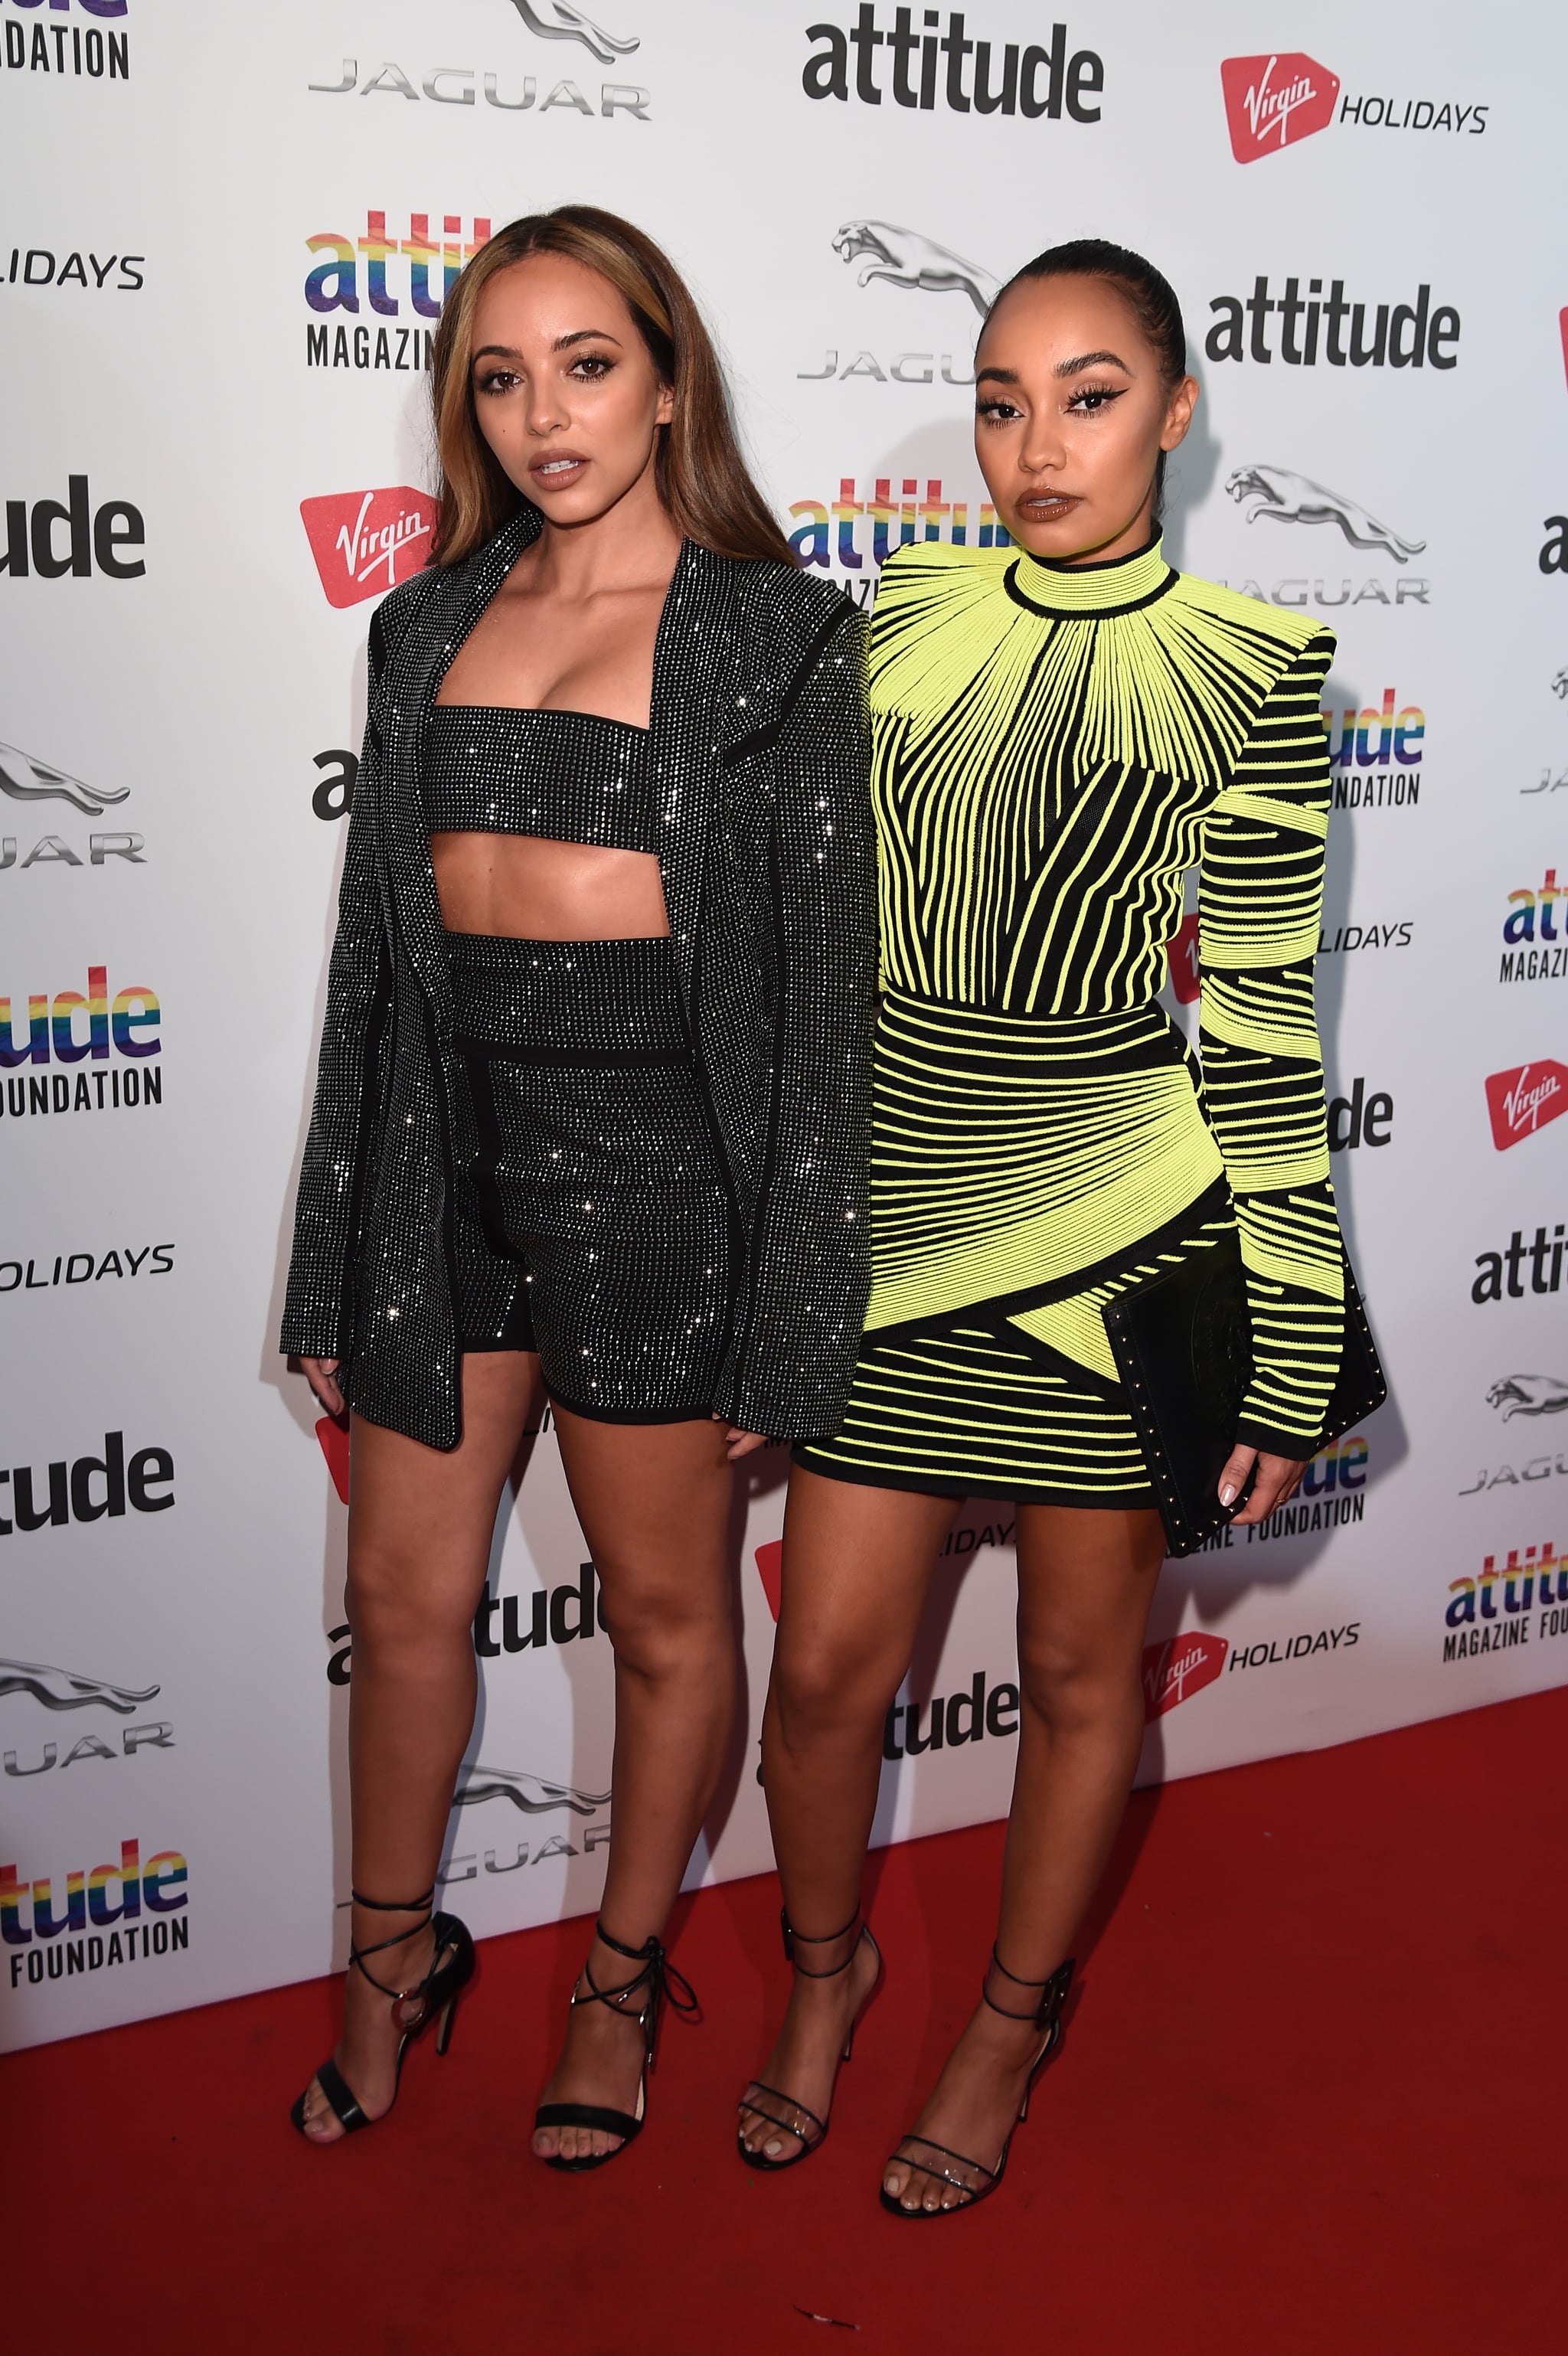 LONDON, ENGLAND - OCTOBER 11:  Jade Thirlwall and Leigh-Anne Pinnock of Little Mix attends The Virgin Holidays Attitude Awards at The Roundhouse on October 11, 2018 in London, England. (Photo by Eamonn M. McCormack/Getty Images)